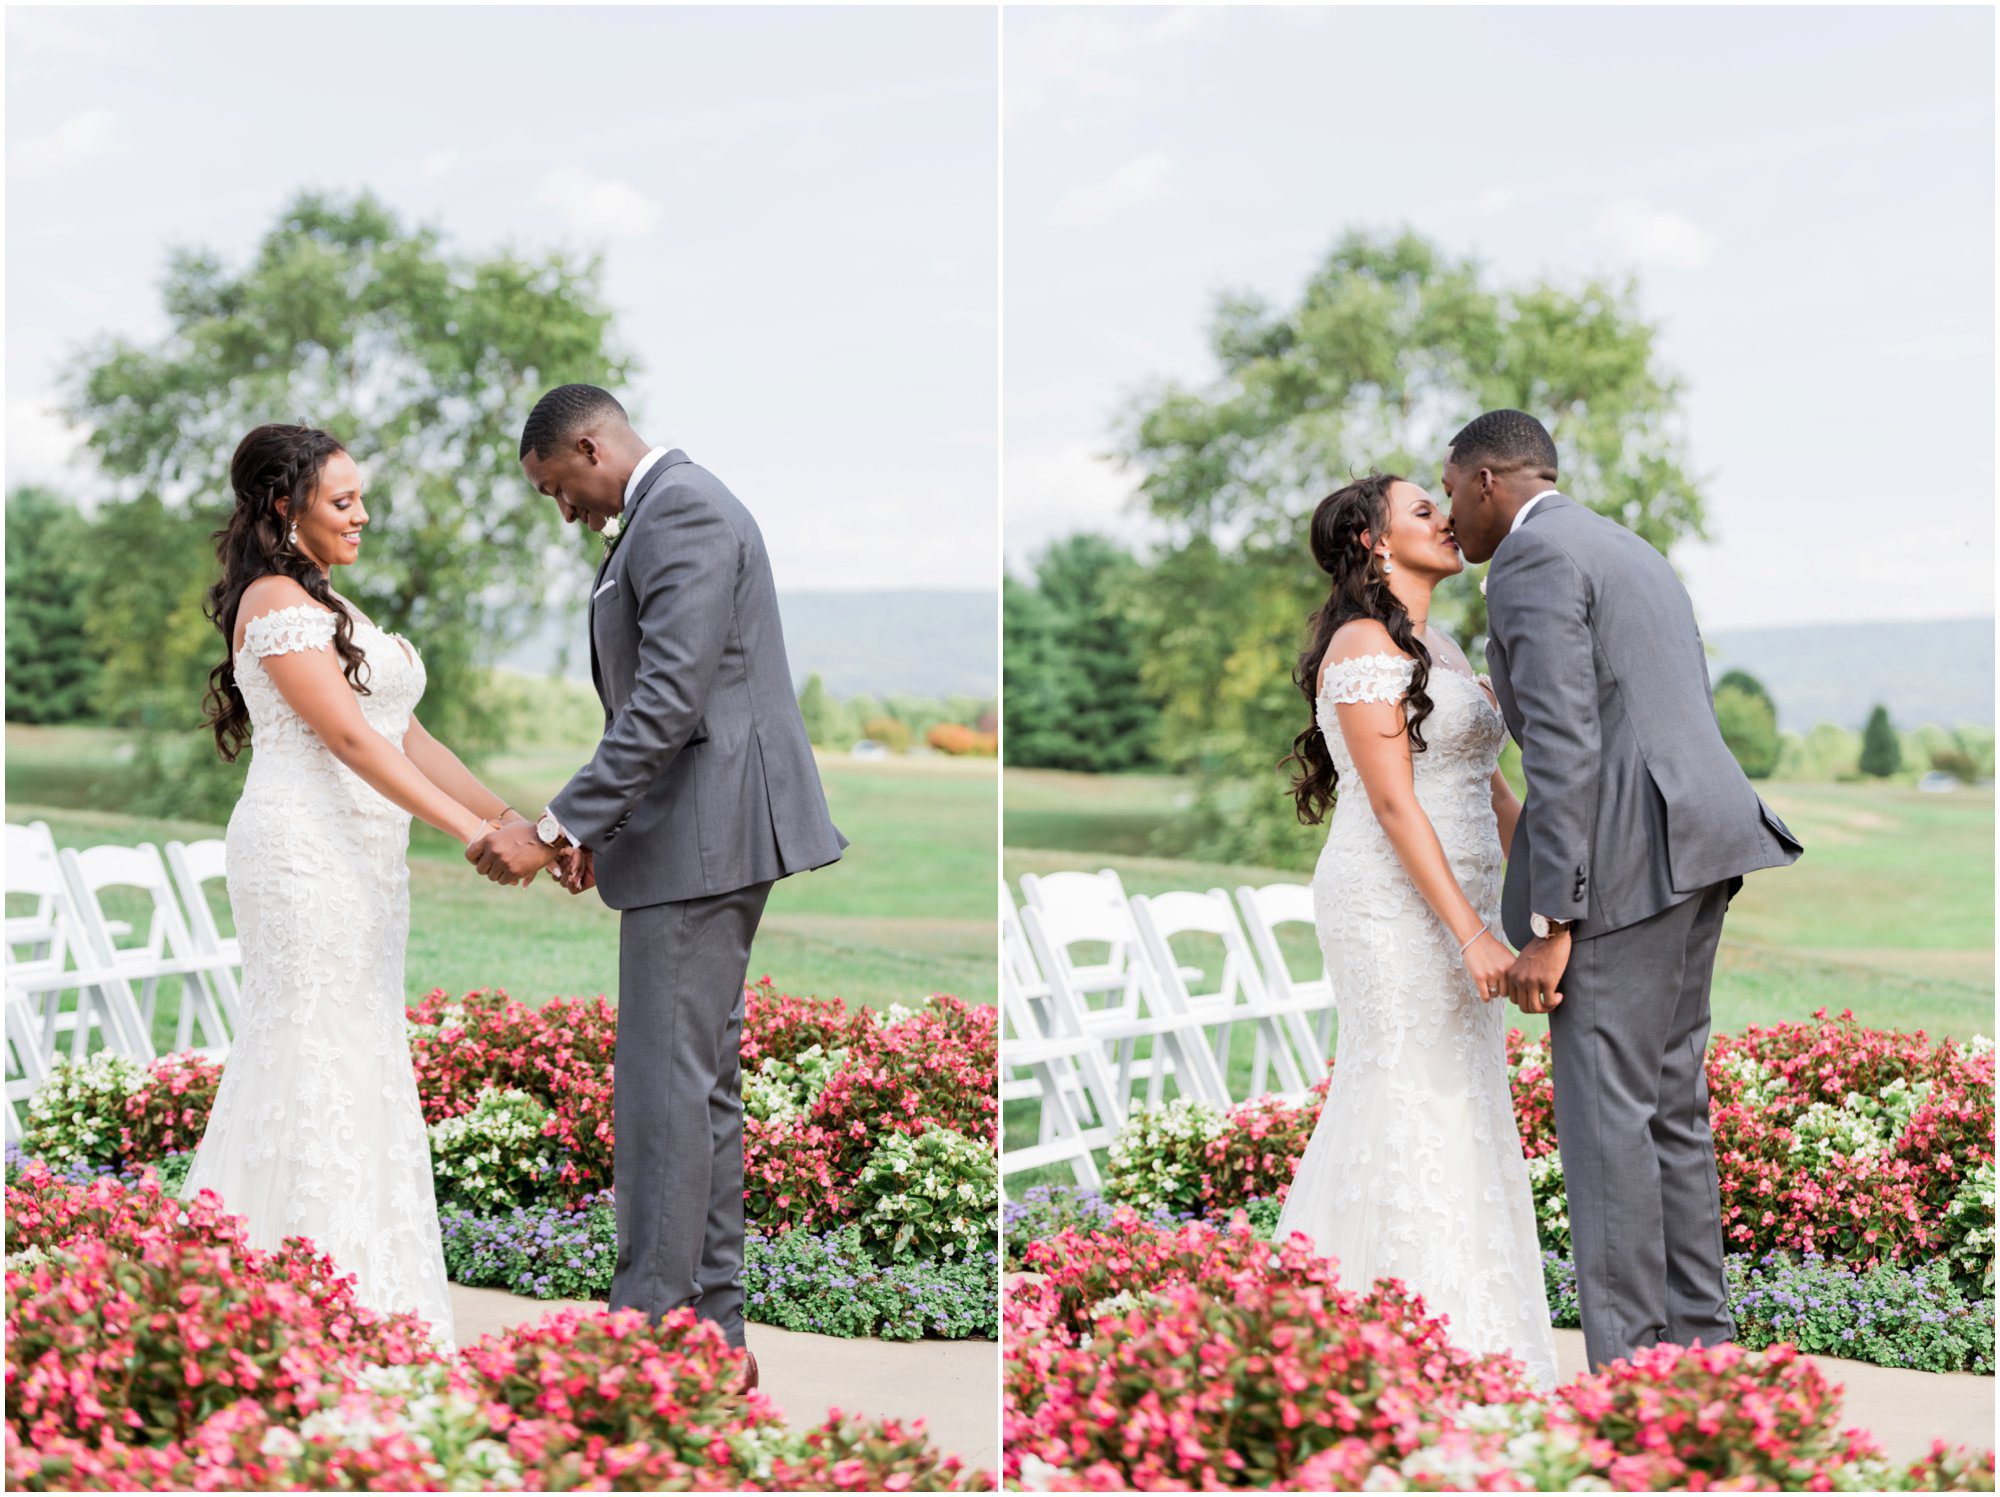 Aireannah & Marquis Bowling Green Country Club Front Royal Franzi Lee Photography-2660.jpg